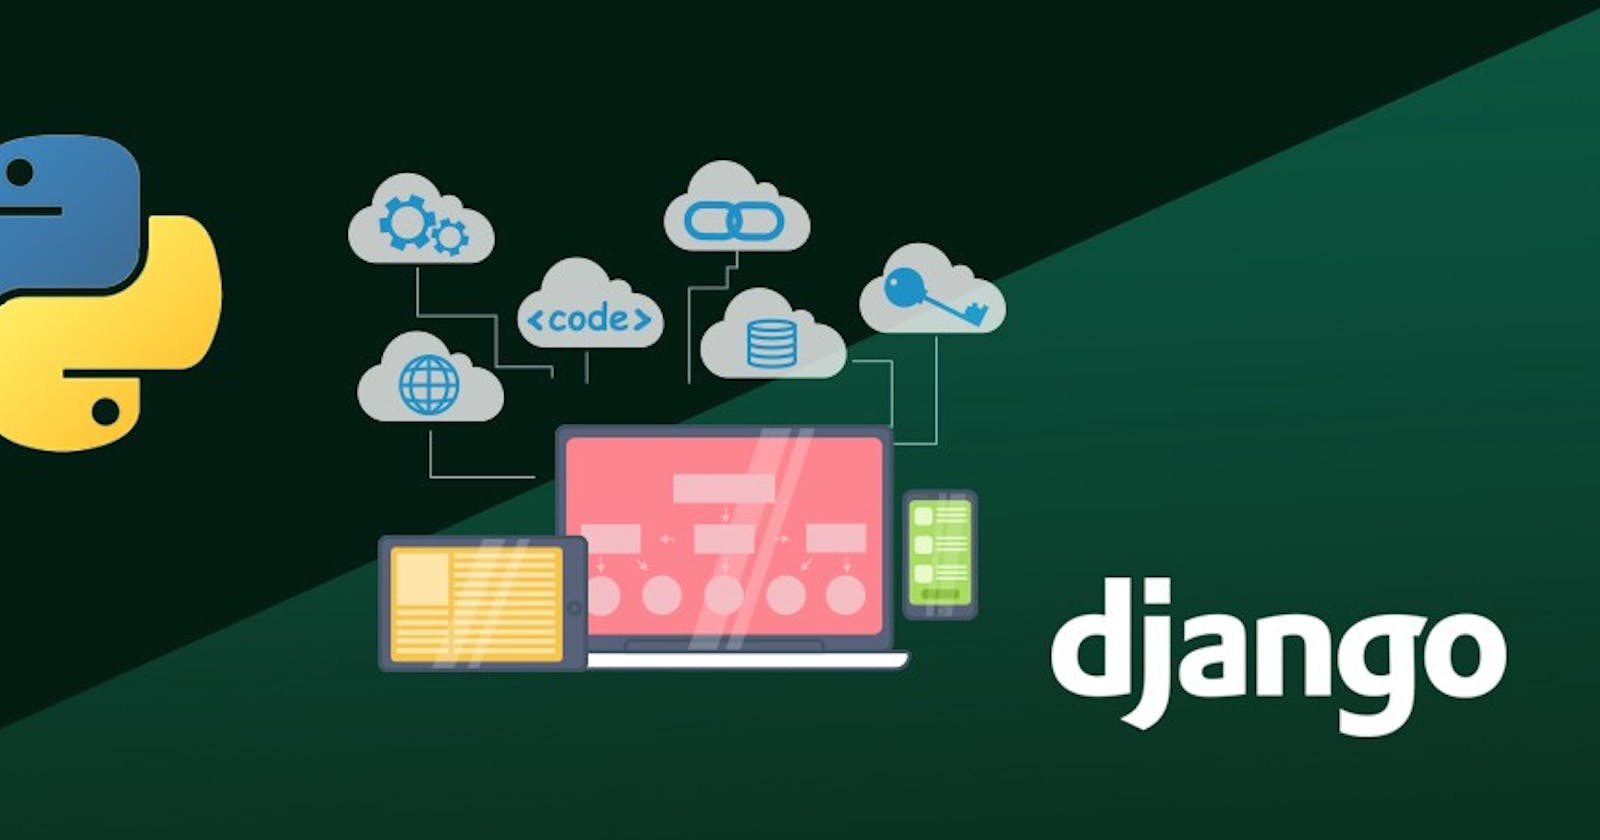 Building Dynamic Web Applications with Django and Cutting-Edge Technologies